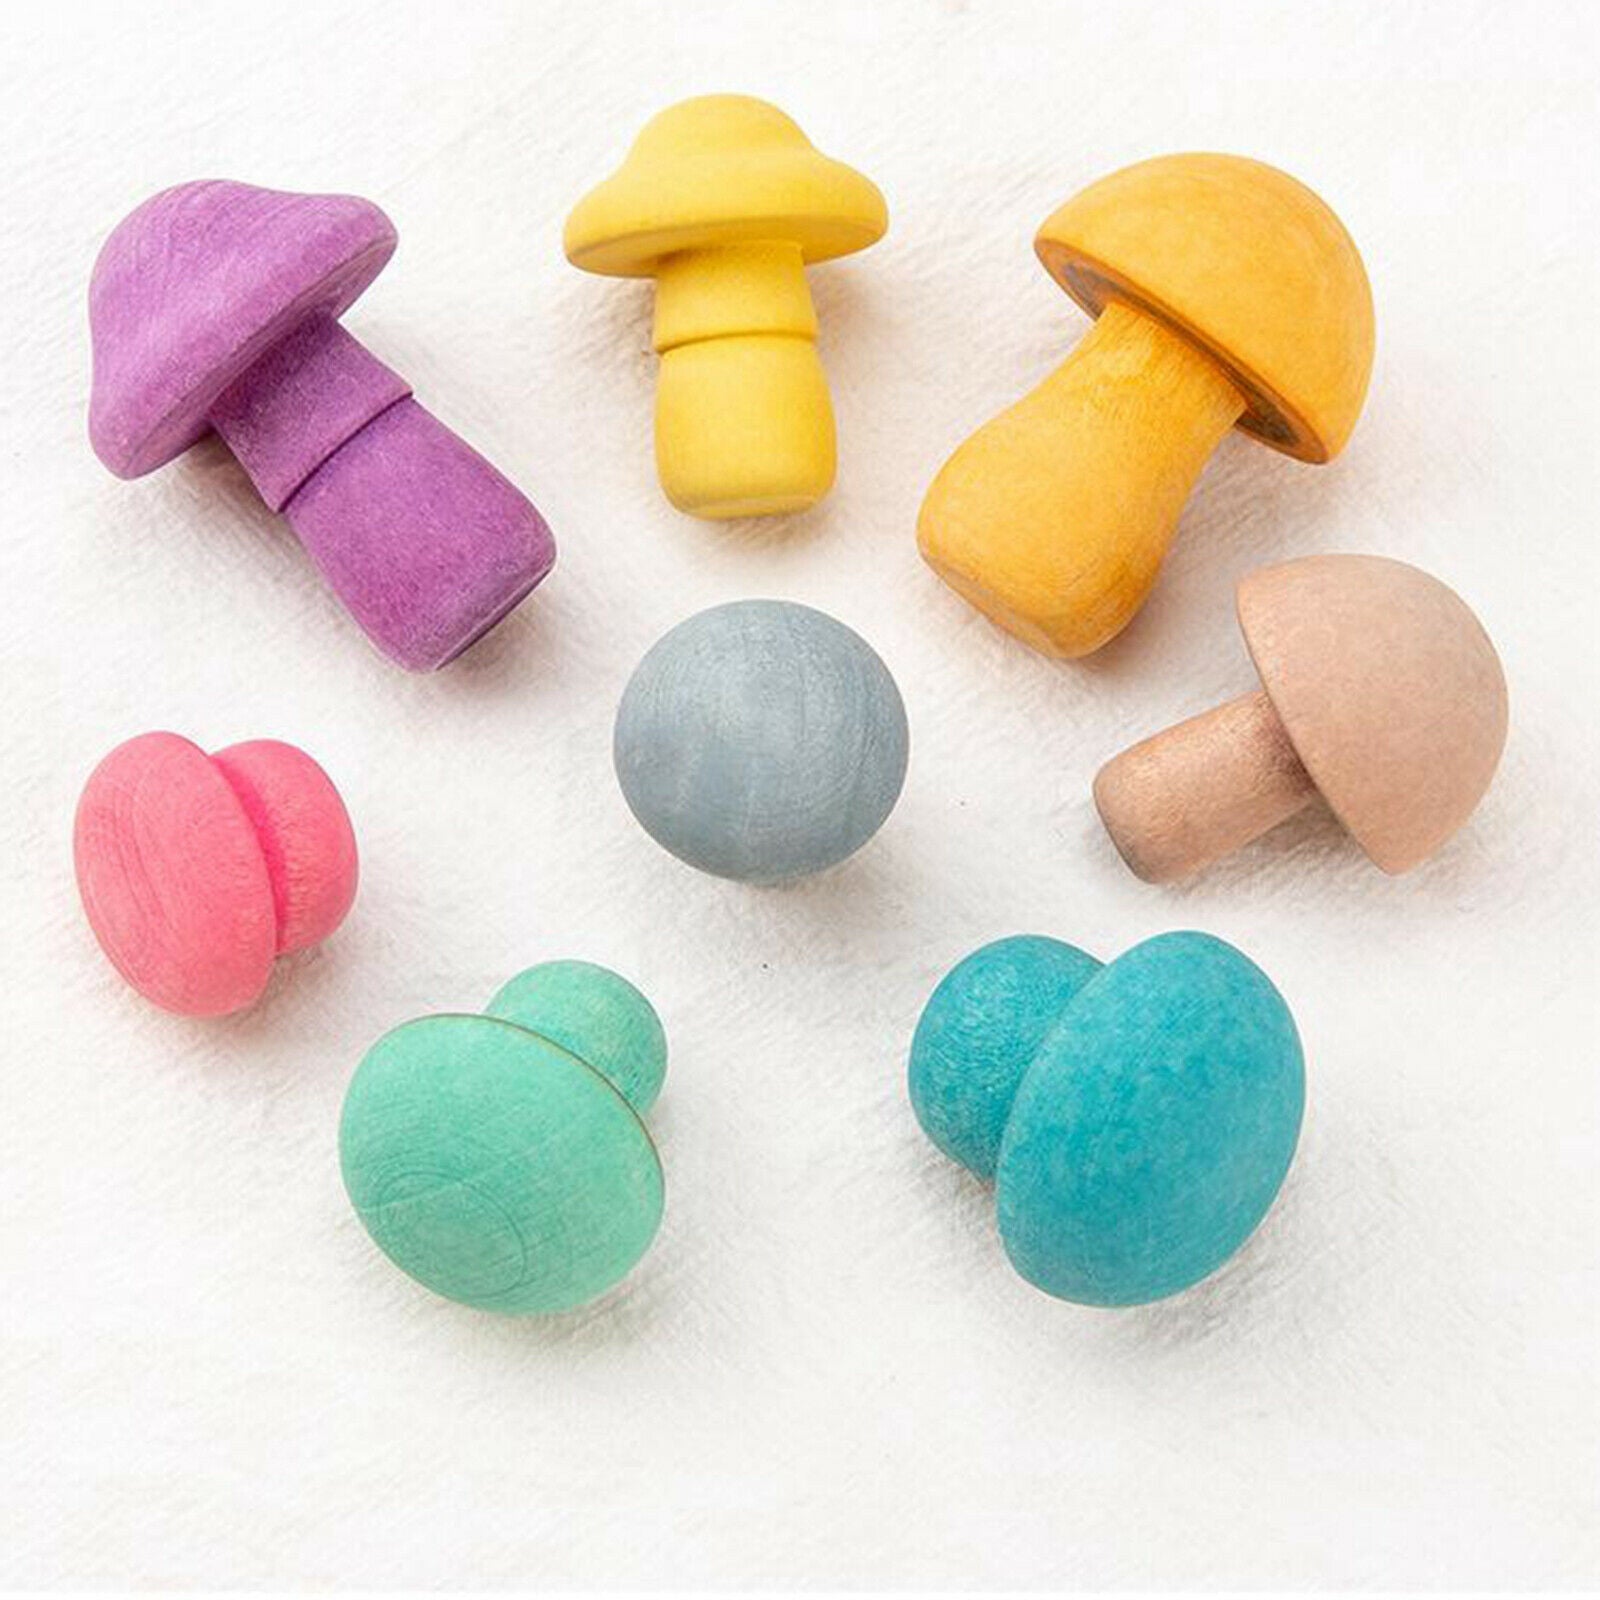 Wooden Mushroom Harvesting Catching   Educational Game for Toddler Toys